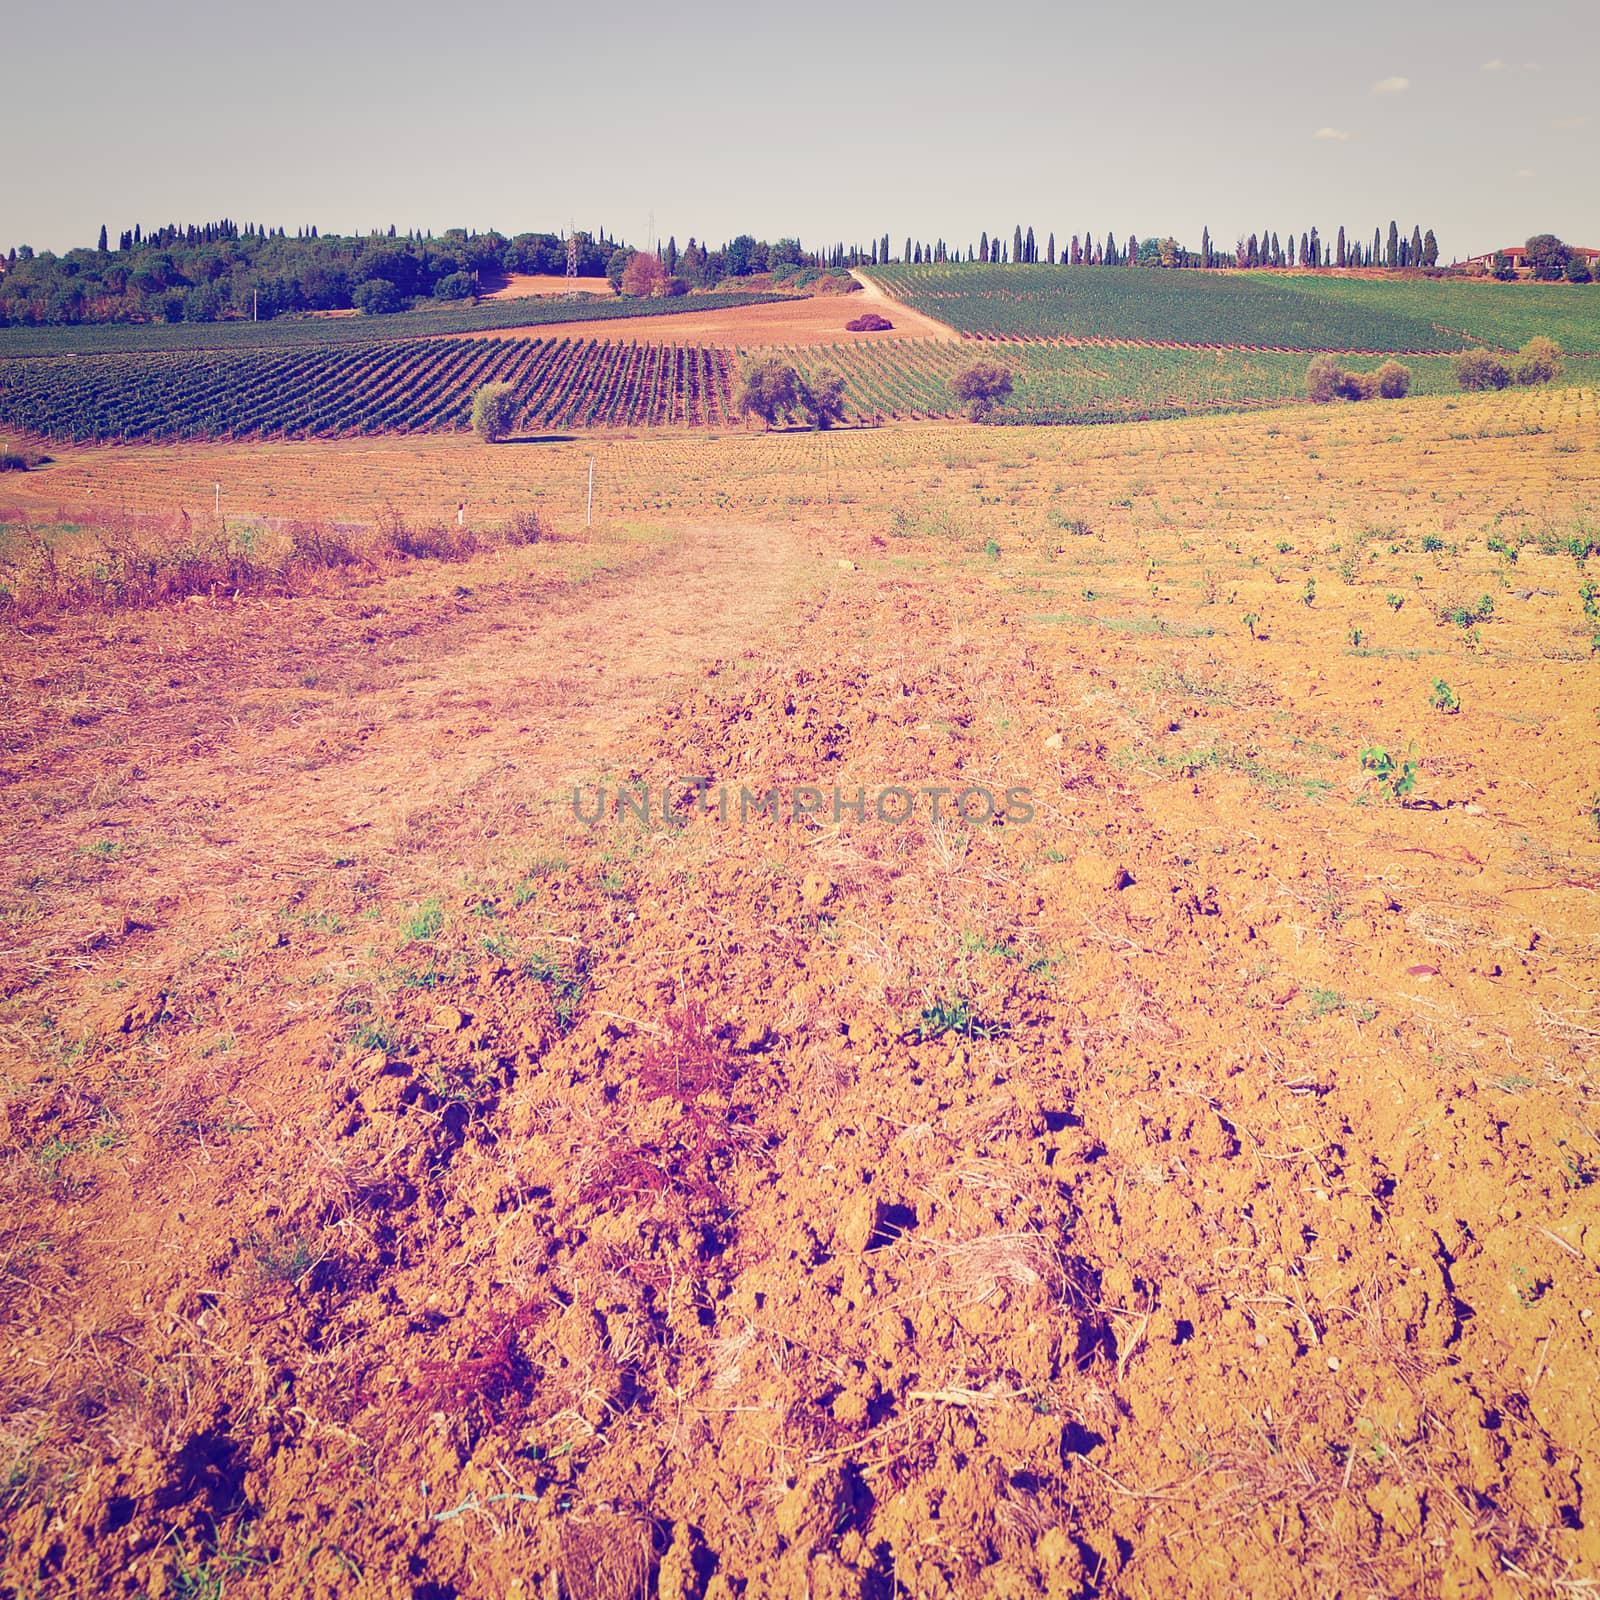 Plowed Fields of Italy in a Autumn on the Background of the Vineyards, Instagram Effect